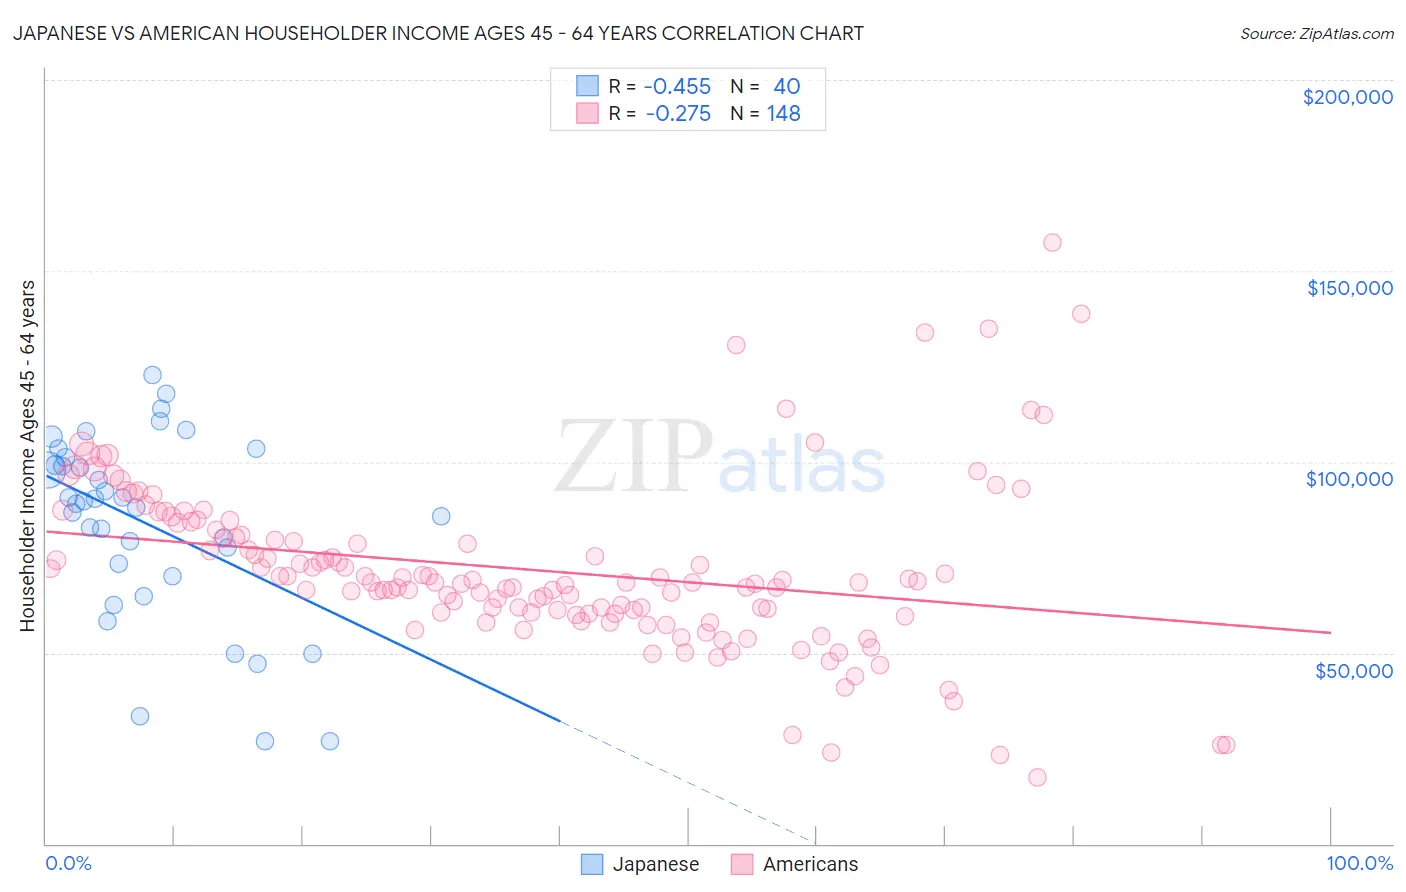 Japanese vs American Householder Income Ages 45 - 64 years